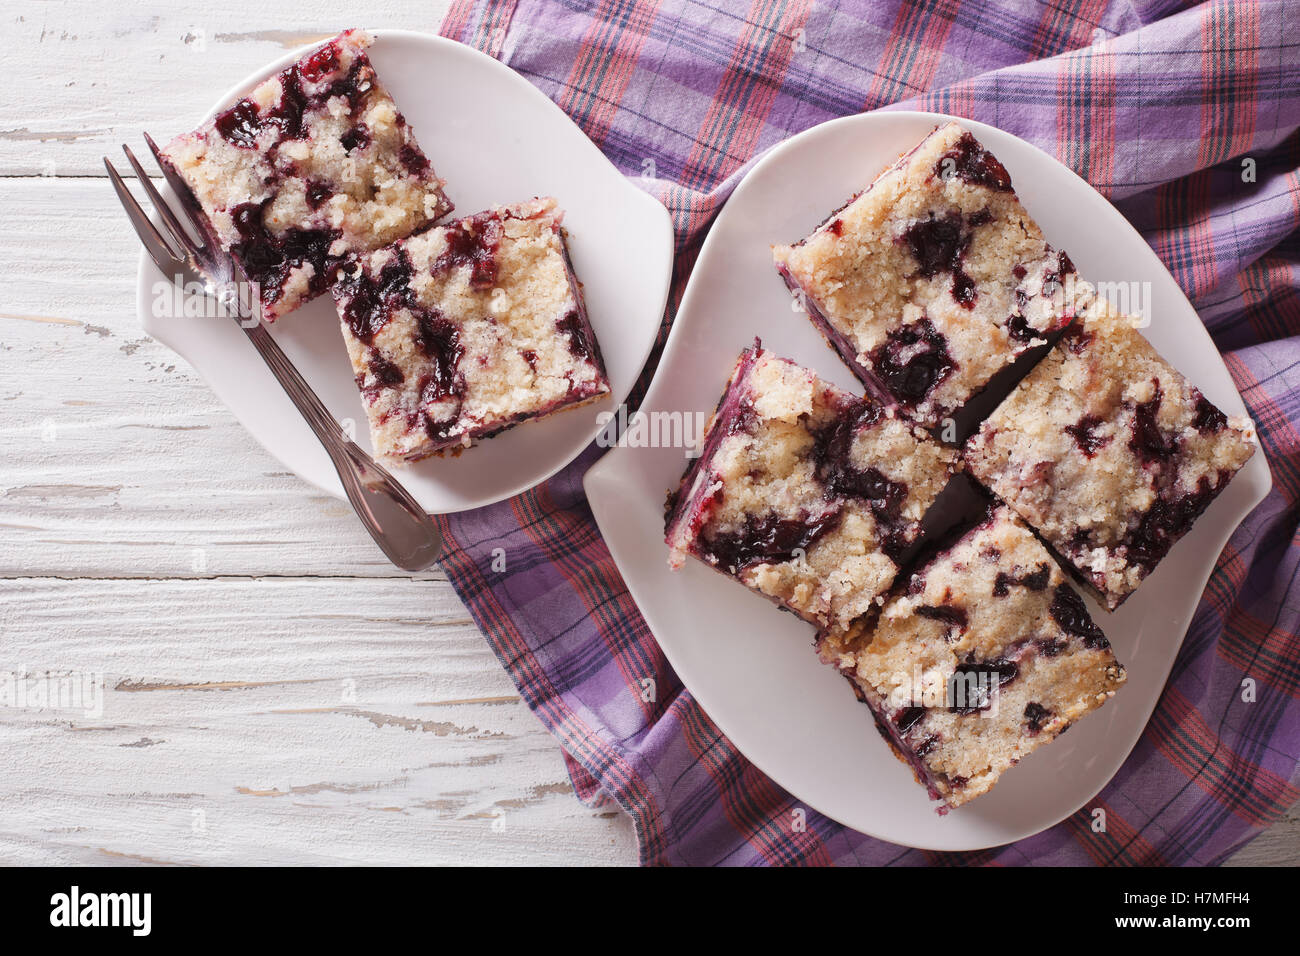 Sponge cake with blueberries close-up on a plate on the table. horizontal view from above Stock Photo